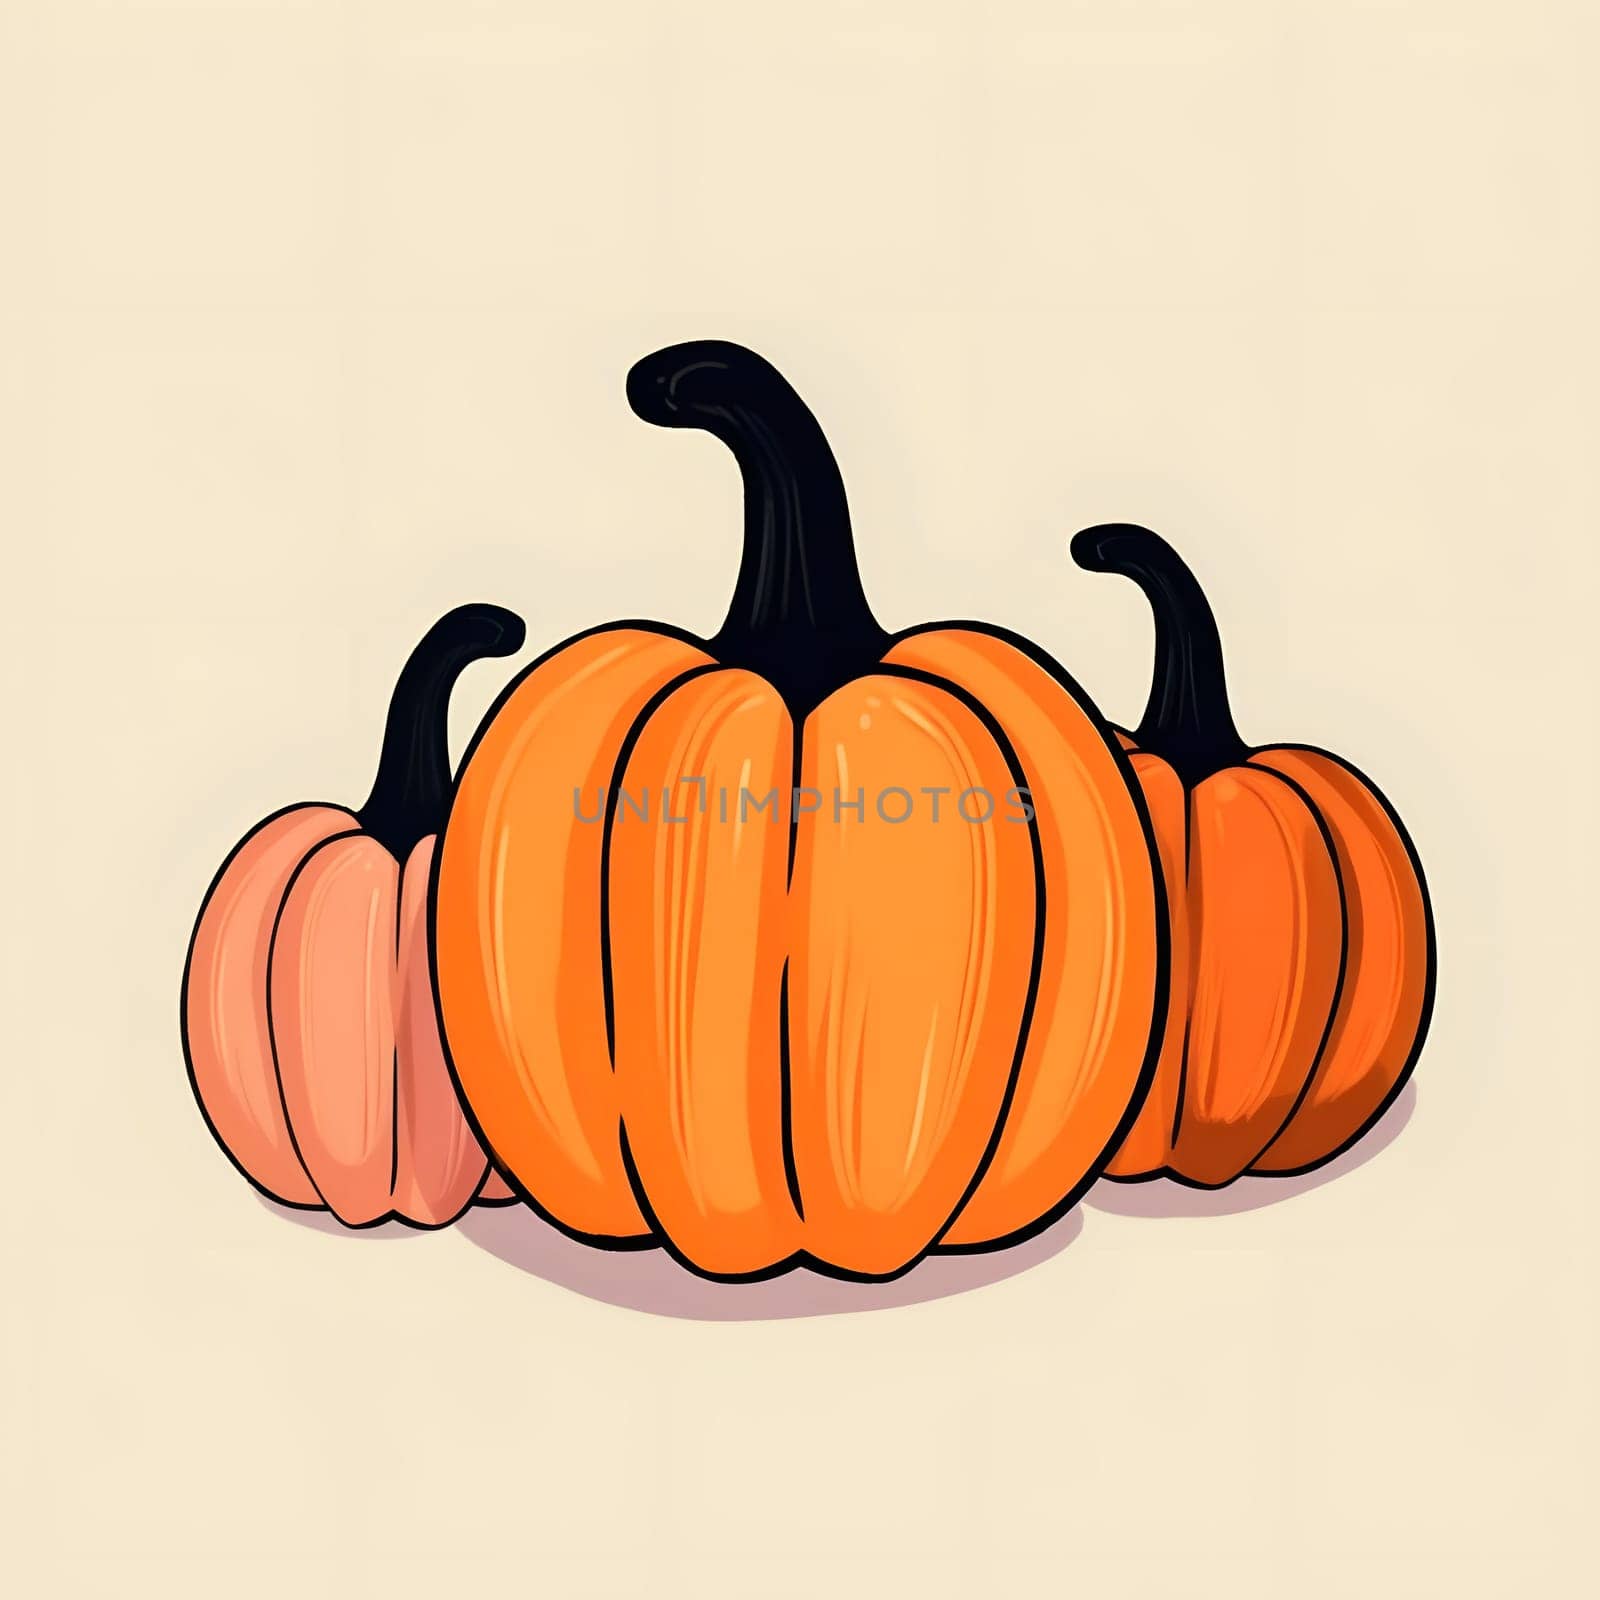 Three pumpkins on a light isolated background. Pumpkin as a dish of thanksgiving for the harvest. An atmosphere of joy and celebration.